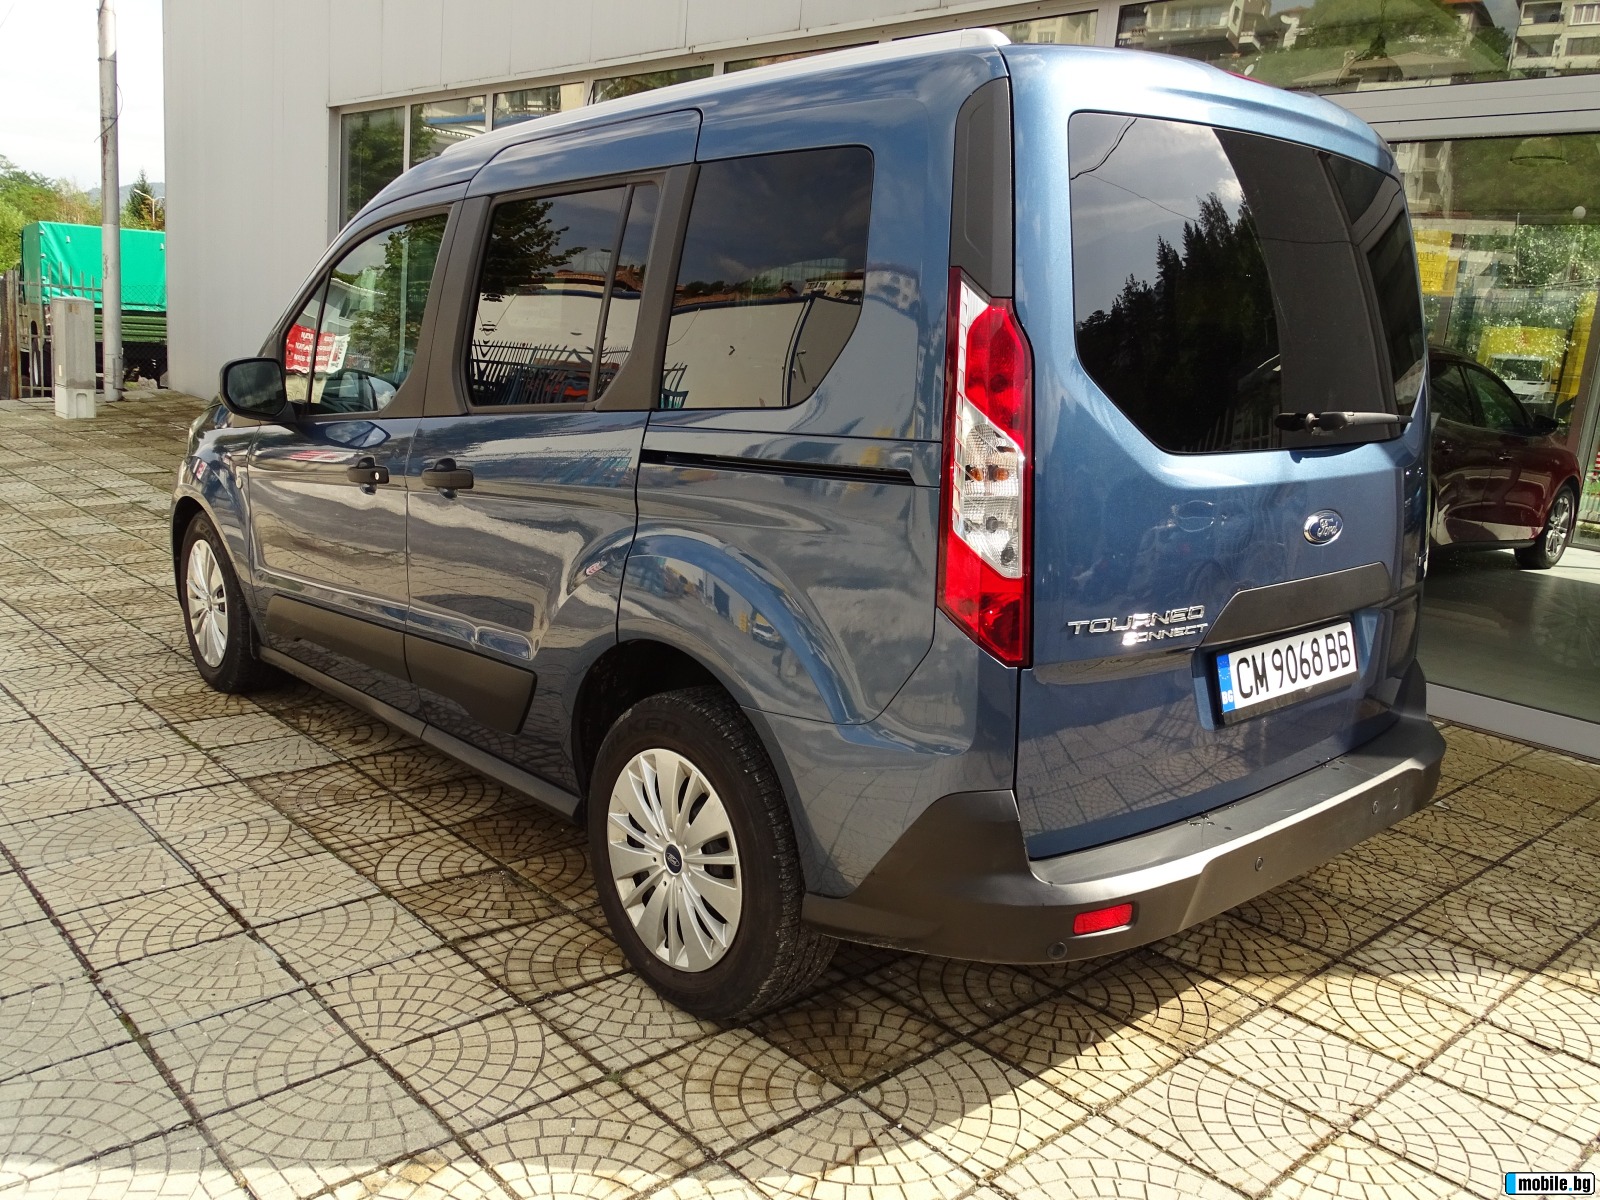 Ford Connect 1.5 TDCi 100PS | Mobile.bg   4